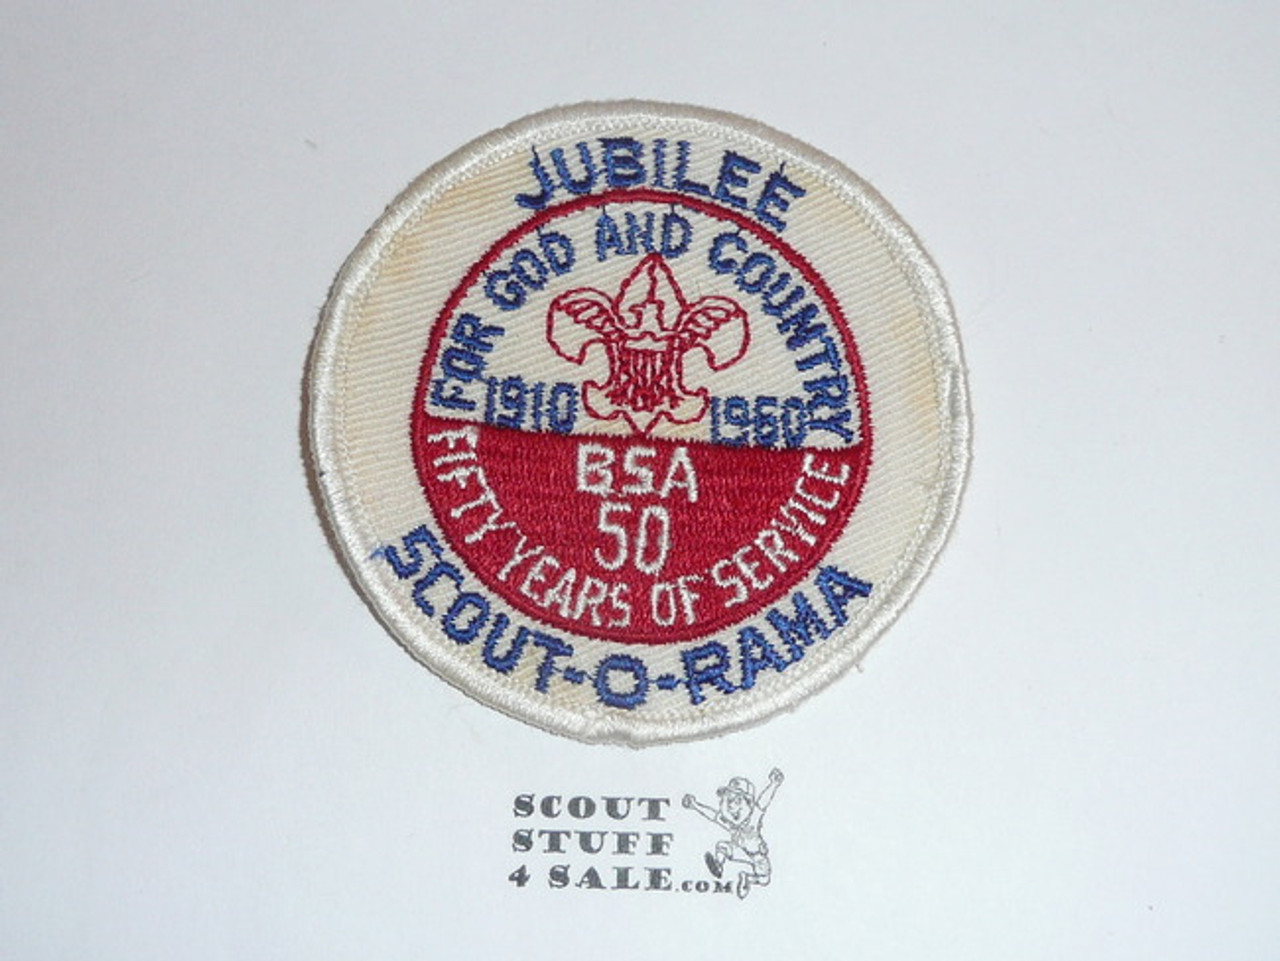 1960 National Jamboree White Twill Jubilee Scout-O-Rama Patch, Lt use and twill discoloration